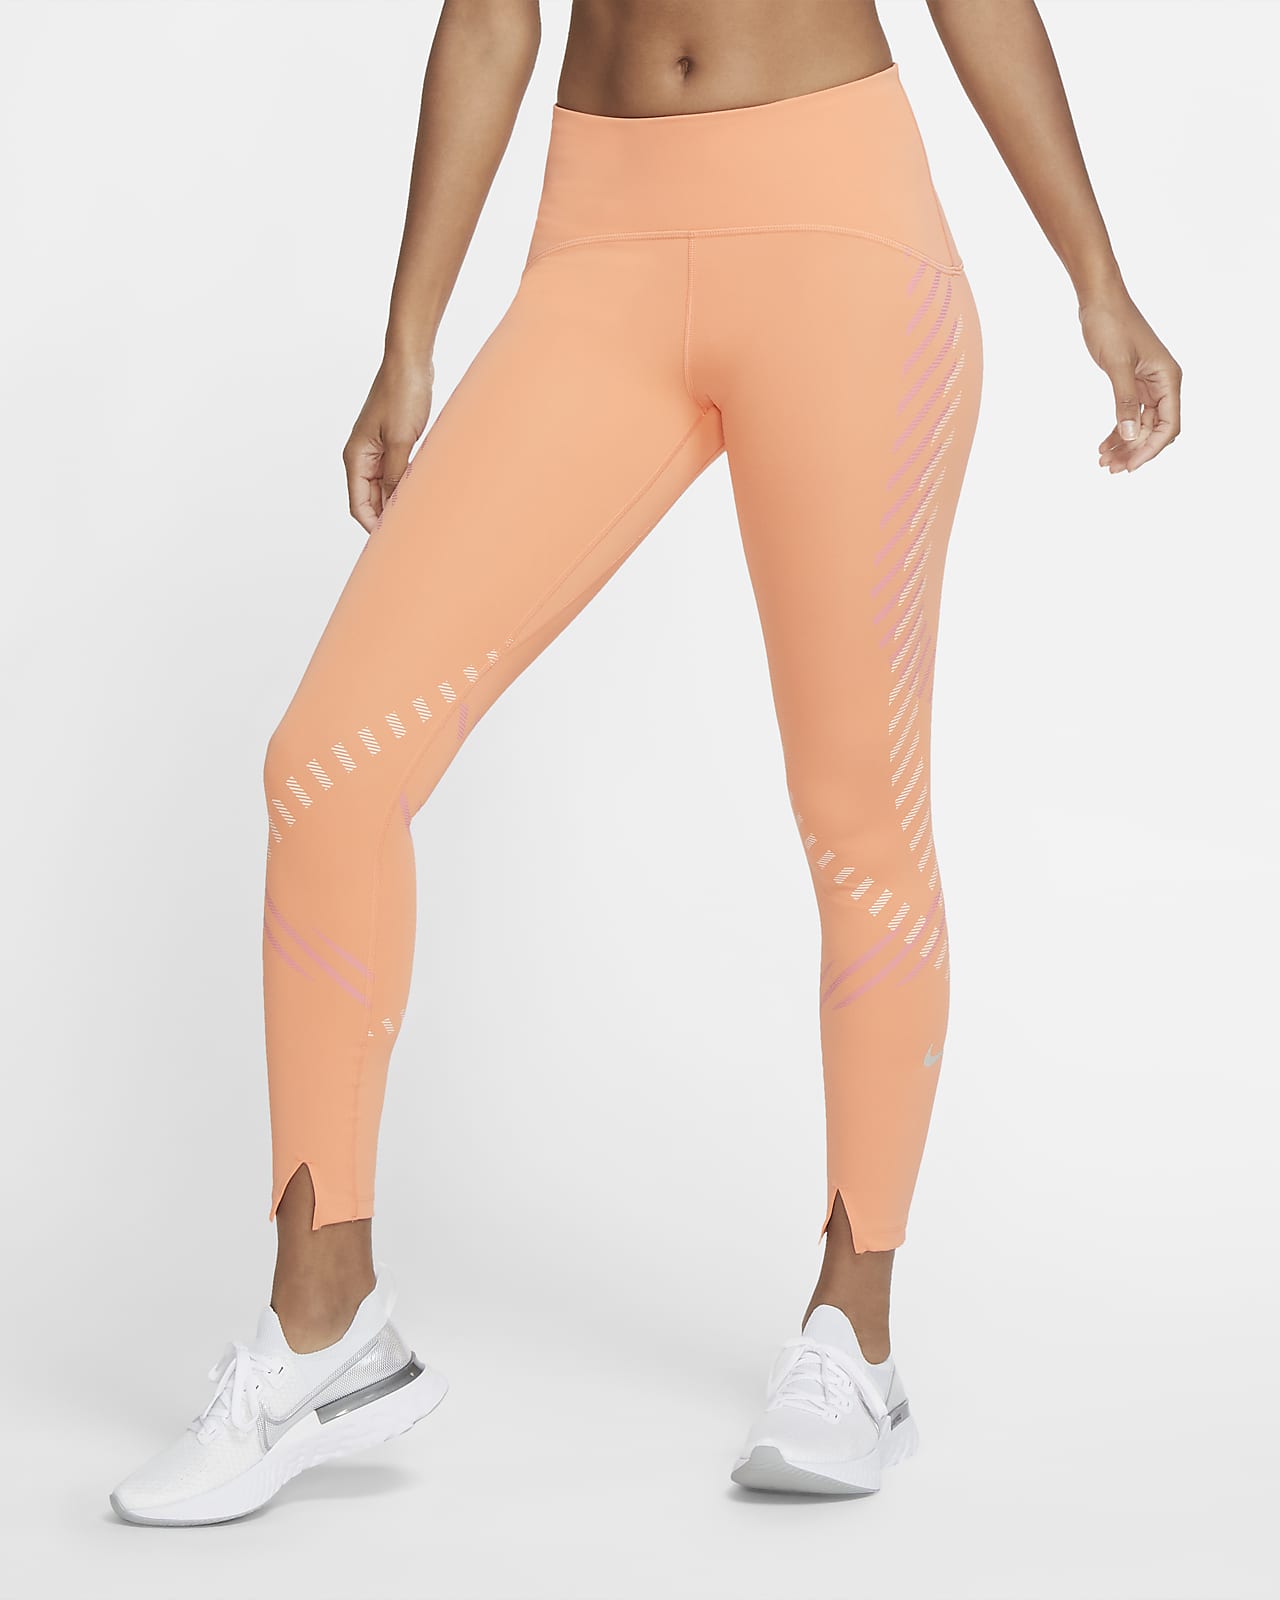 nike essential running tights